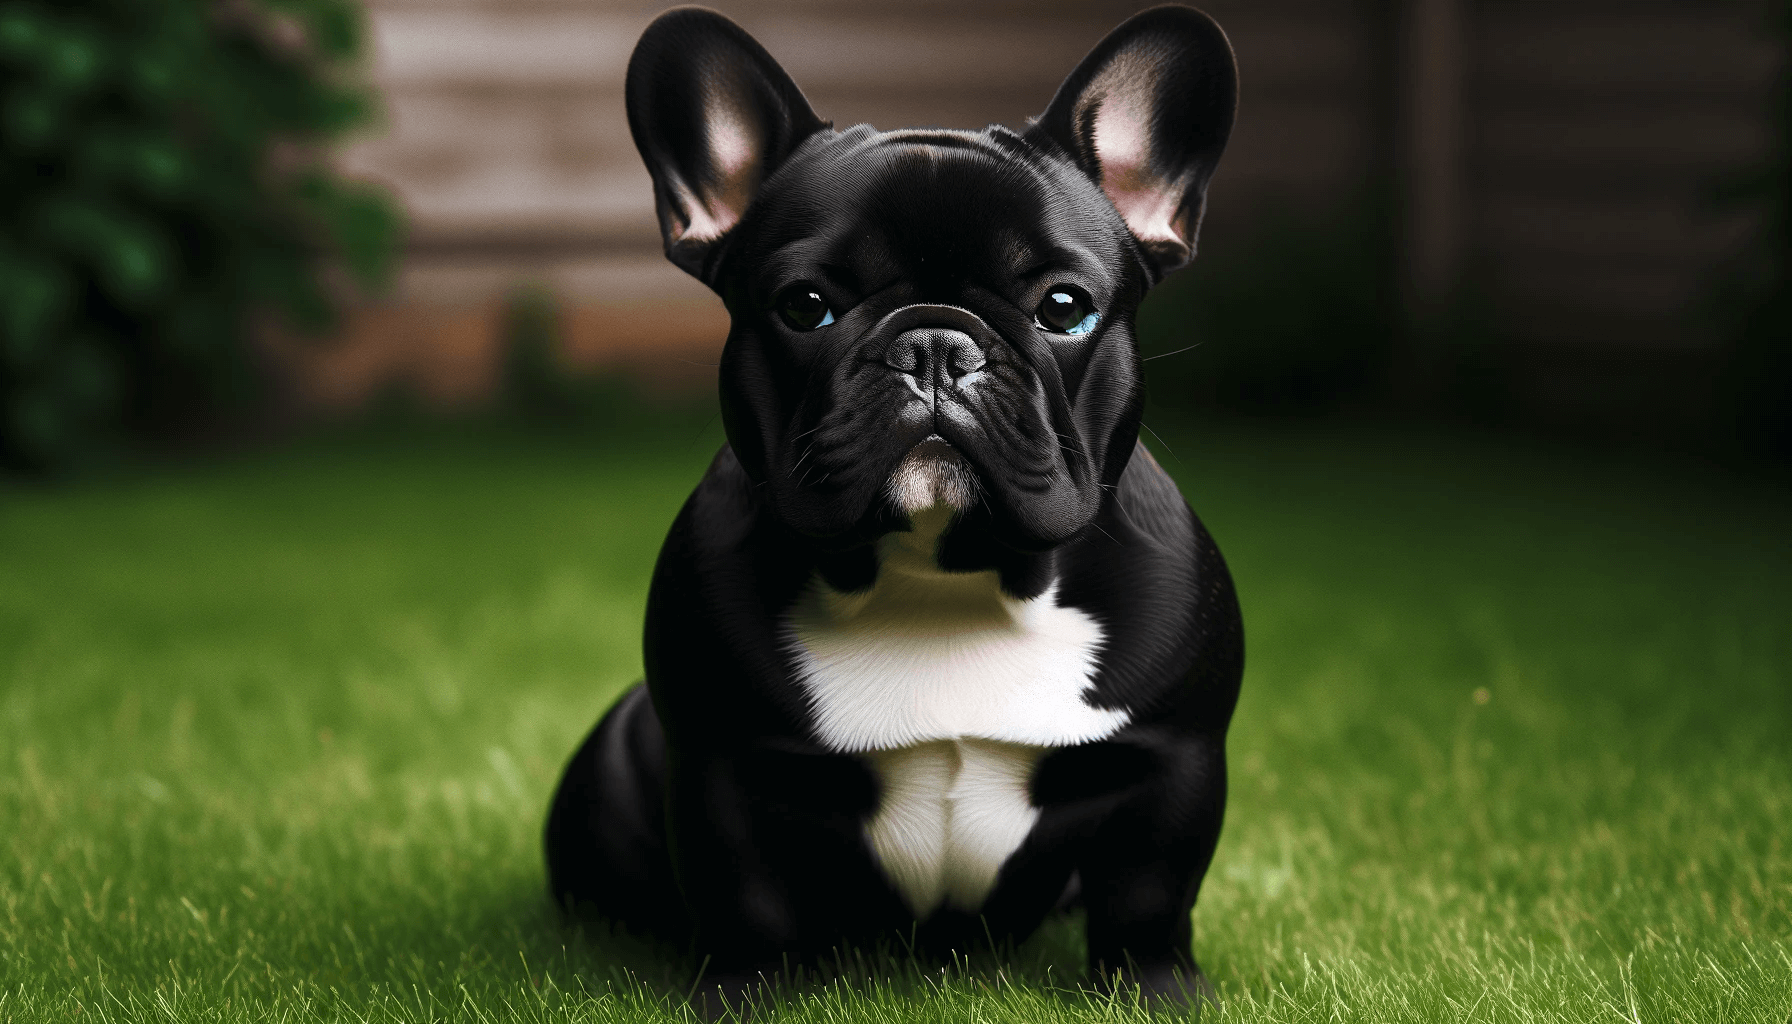 Black French Bulldog with a Distinctive White Chest Patch